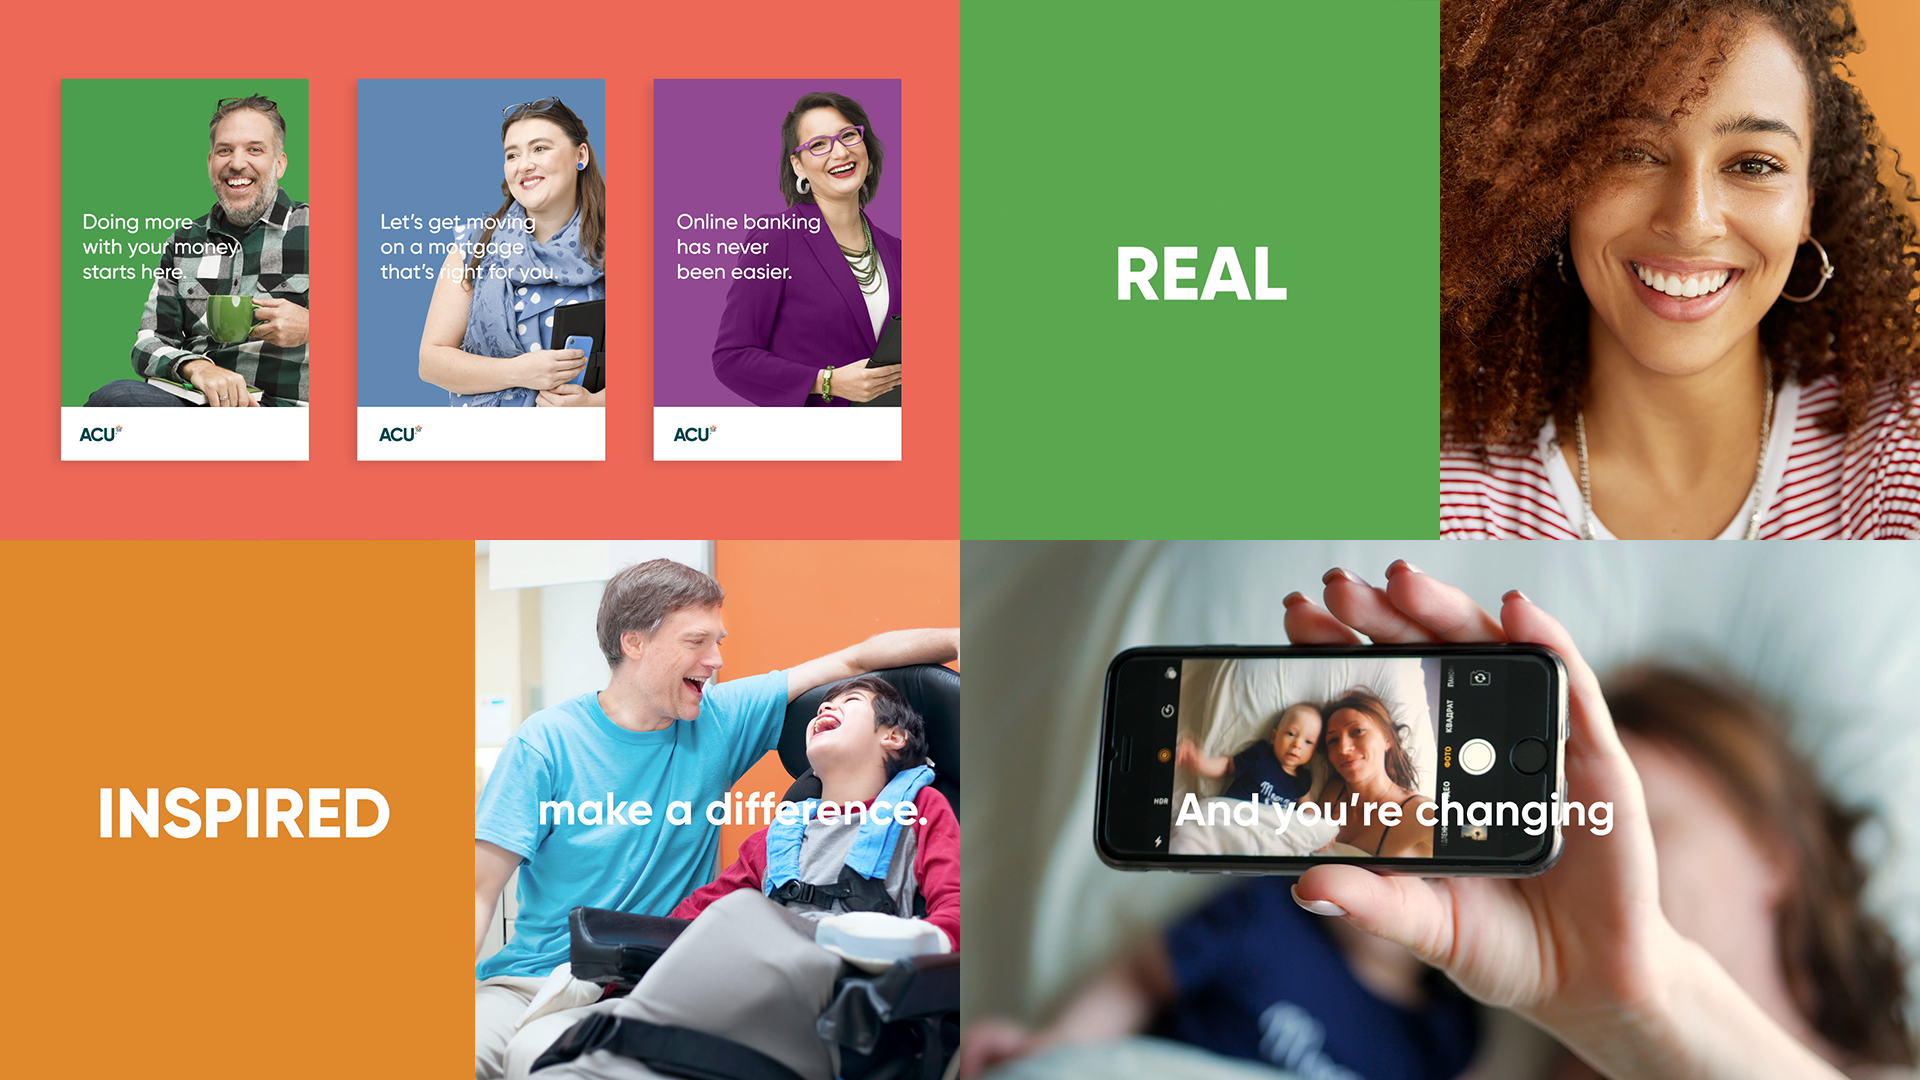 A collage of images, featuring the word "inspired," "real," ACU posters, a mother taking a selfie with her son, and a smiling woman.